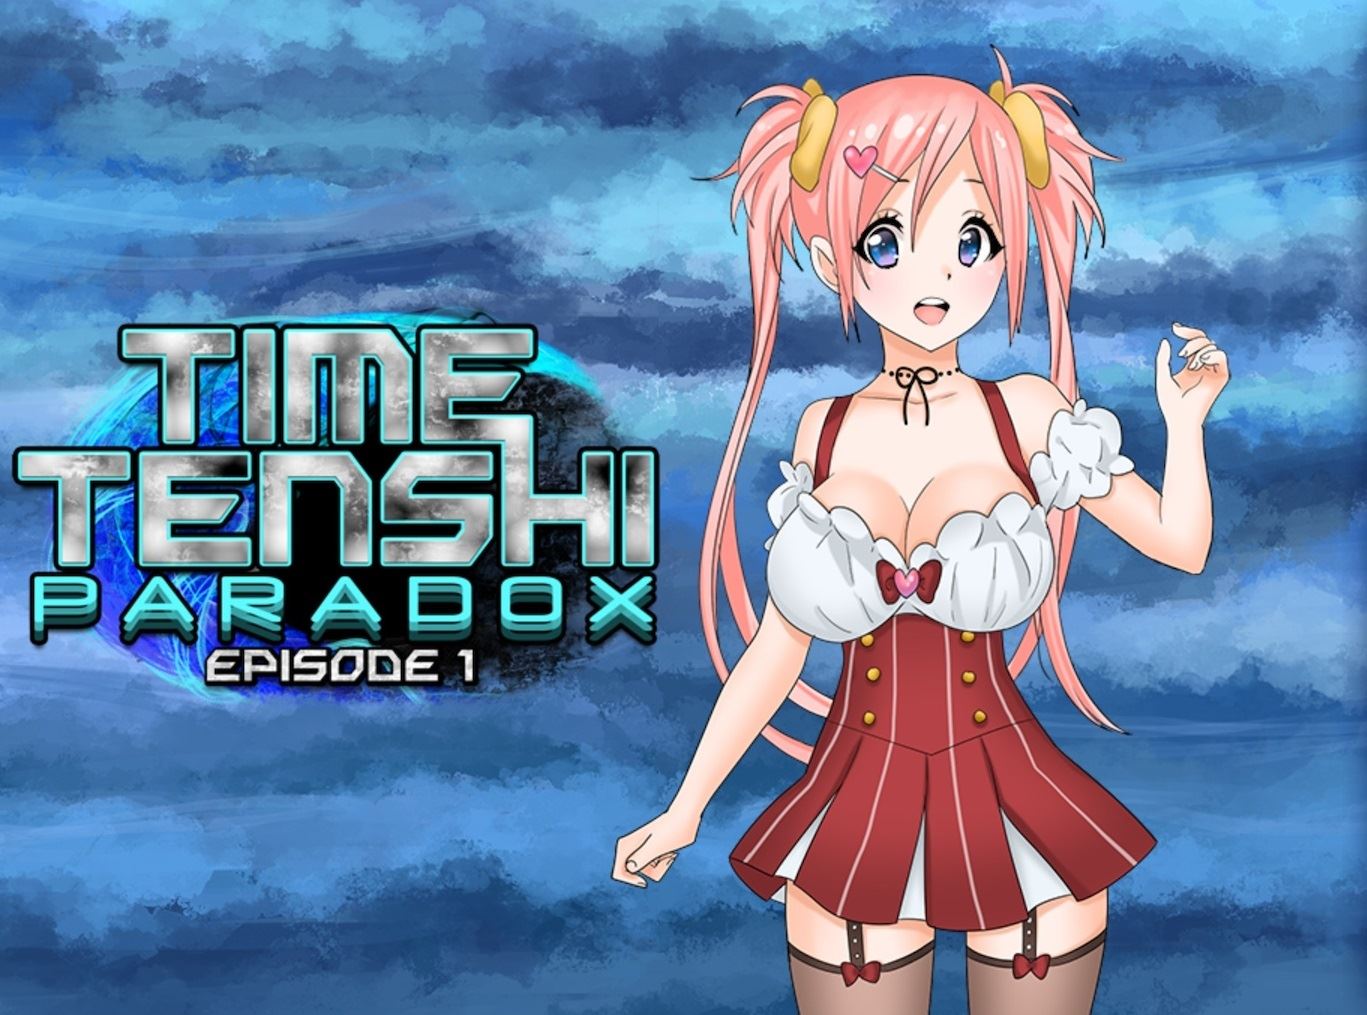 Time Tenshi Paradox porn xxx game download cover